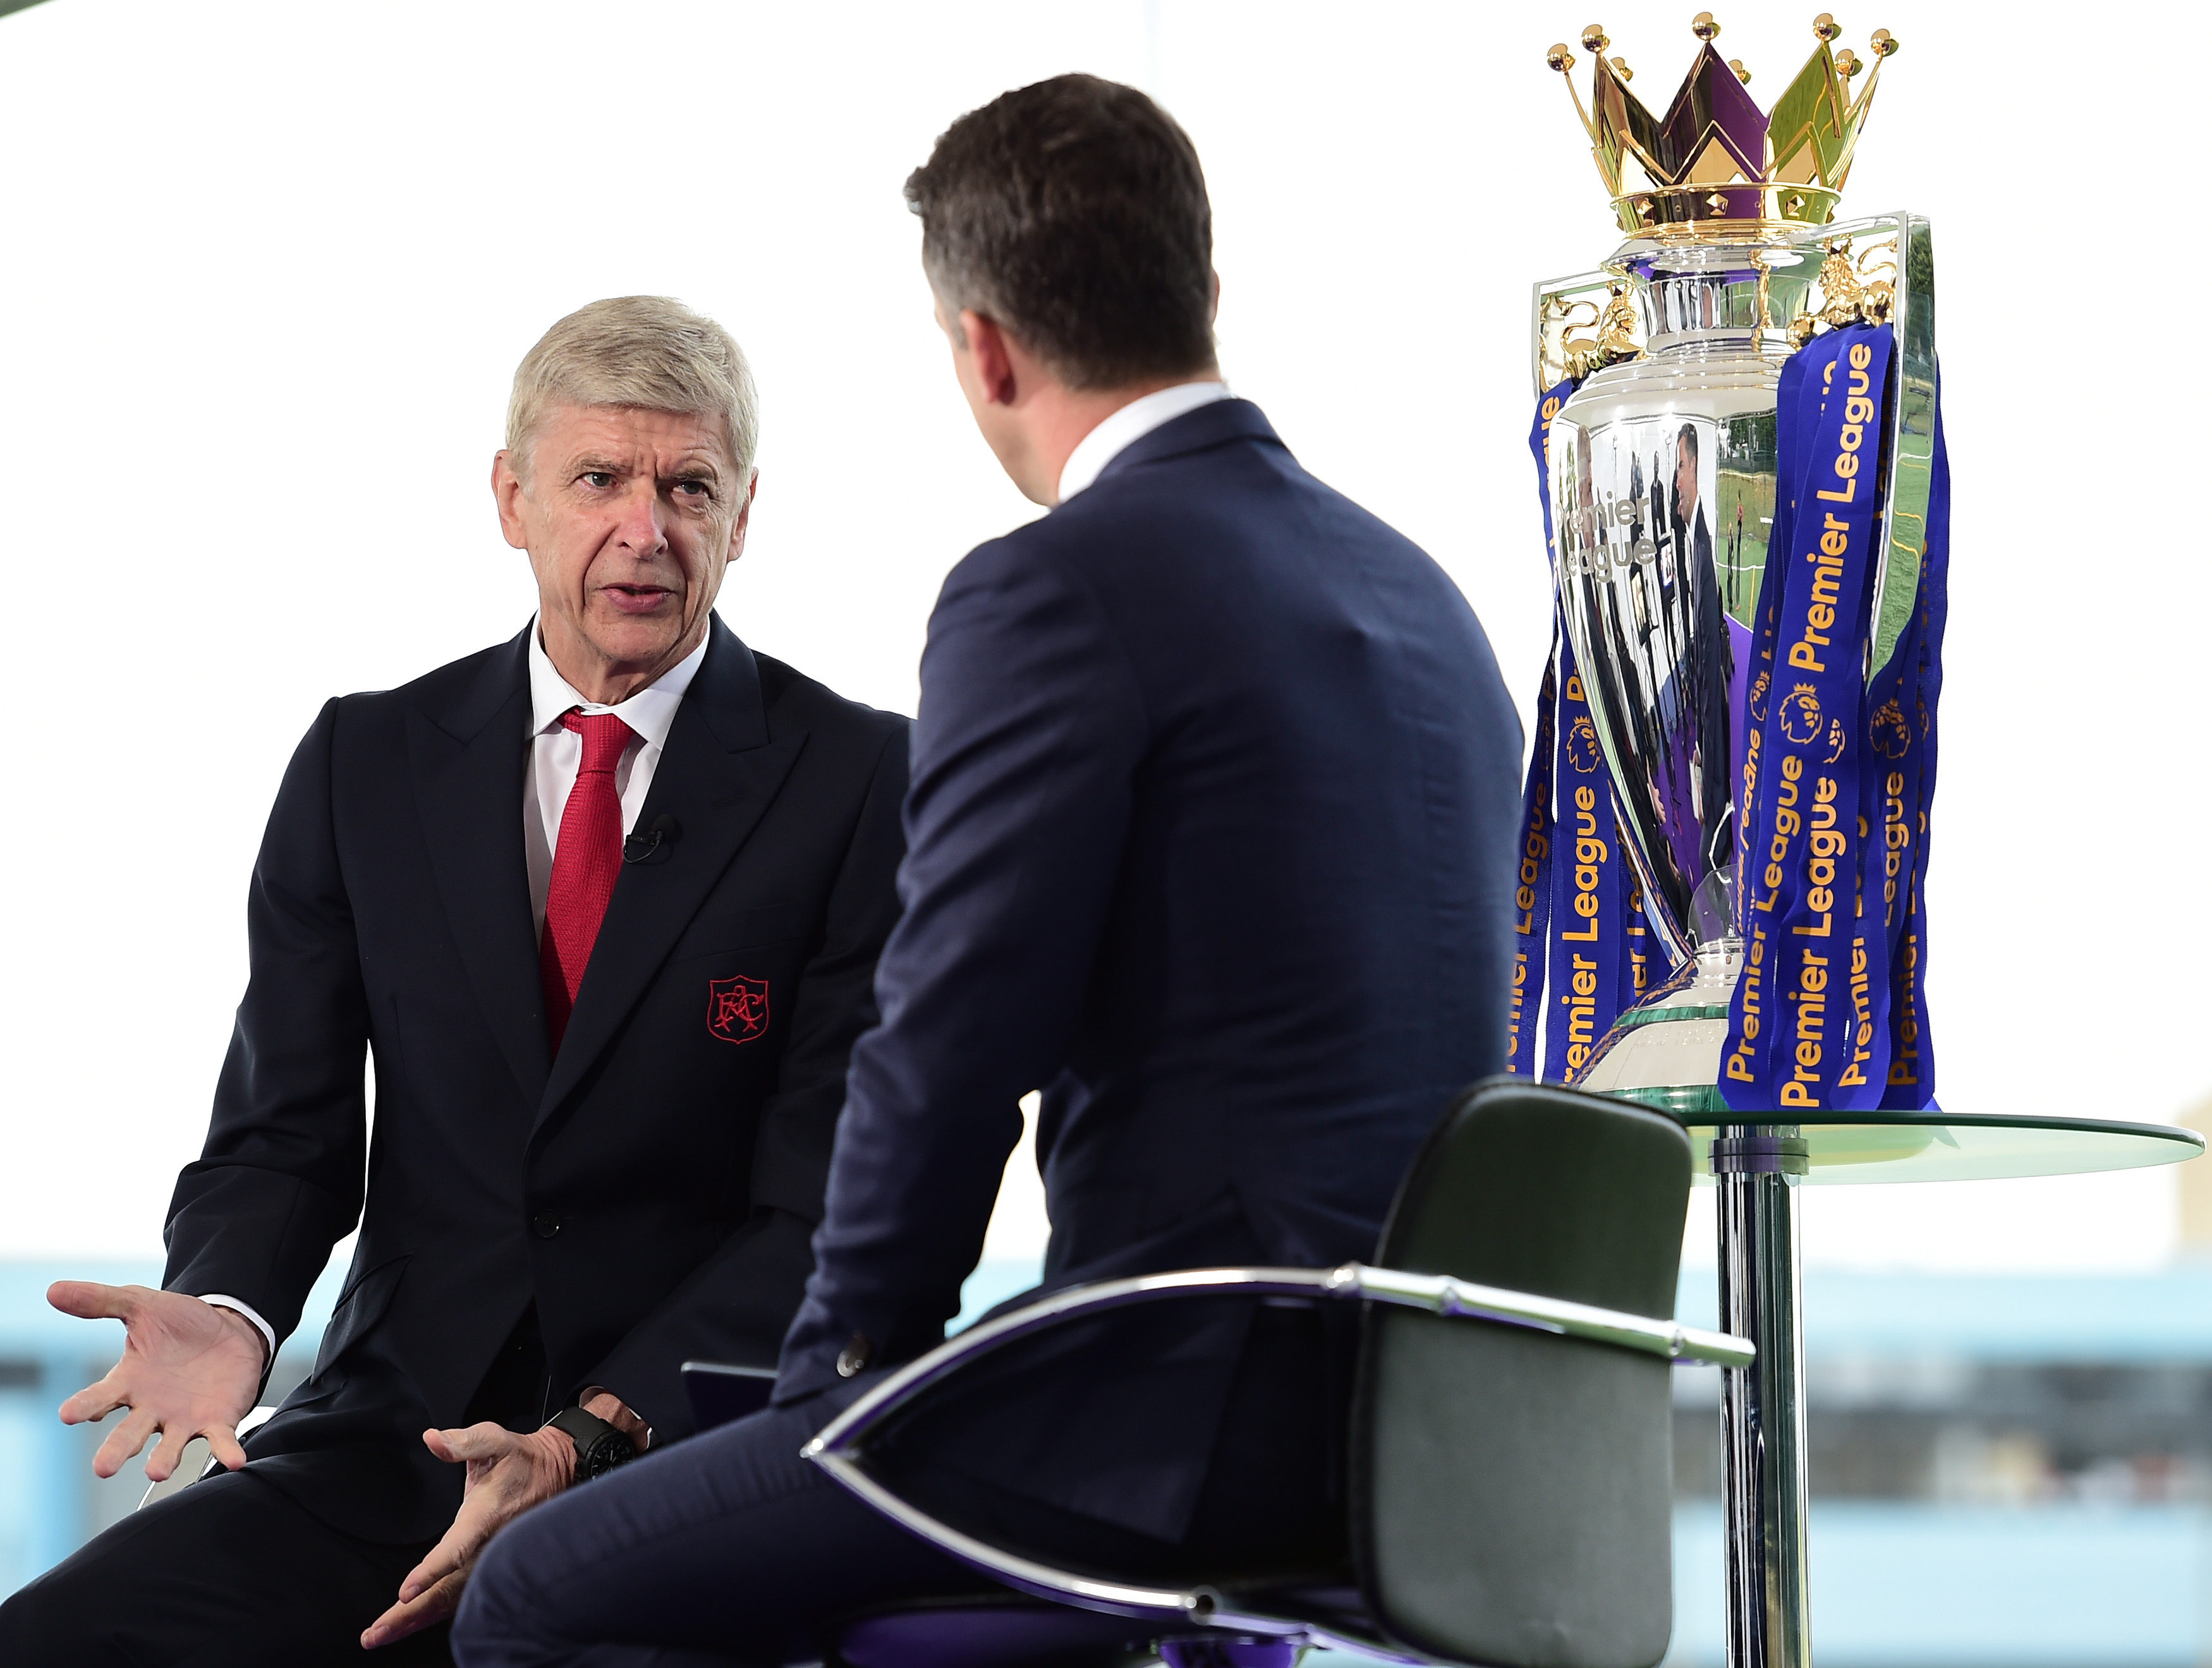 ISLINGTON, ENGLAND - AUGUST 10:  Arsene Wenger, manager of Arsenal is interviewed by Sky Sports during the Official Premier League Season Launch Media Event held at Market Road pitches on August 10, 2016 in Islington, England. (Photo by Alex Broadway/Getty Images)